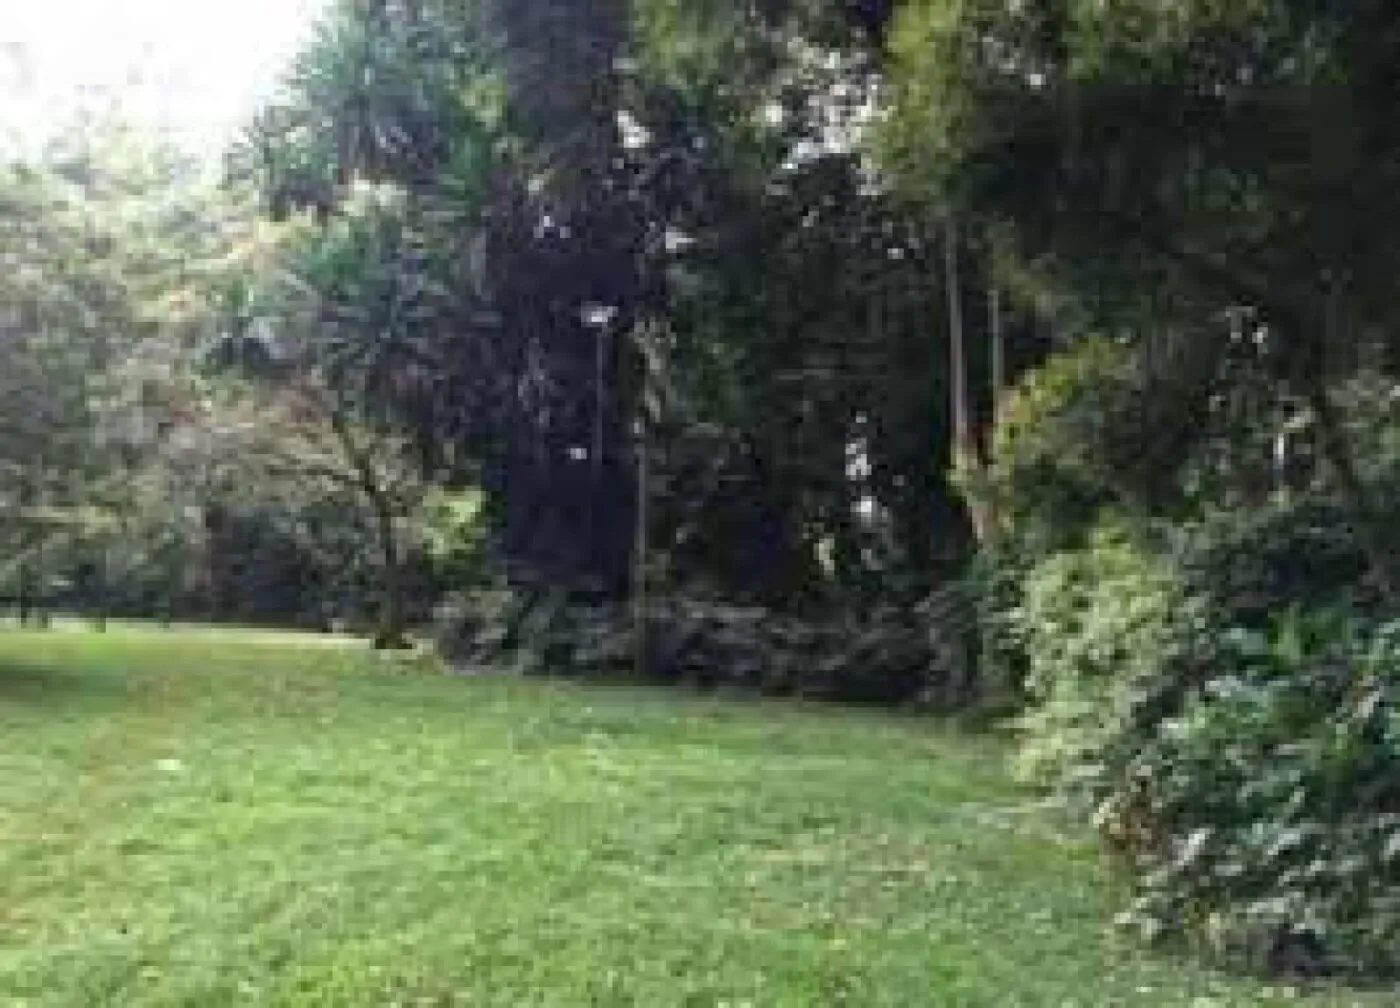 Land For Sale Real Estate-Land for sale in Karen Hardy 1/2 Acre @30M Ready Title Deed QUICK SALE Exclusive half acre 0.5🔥 3